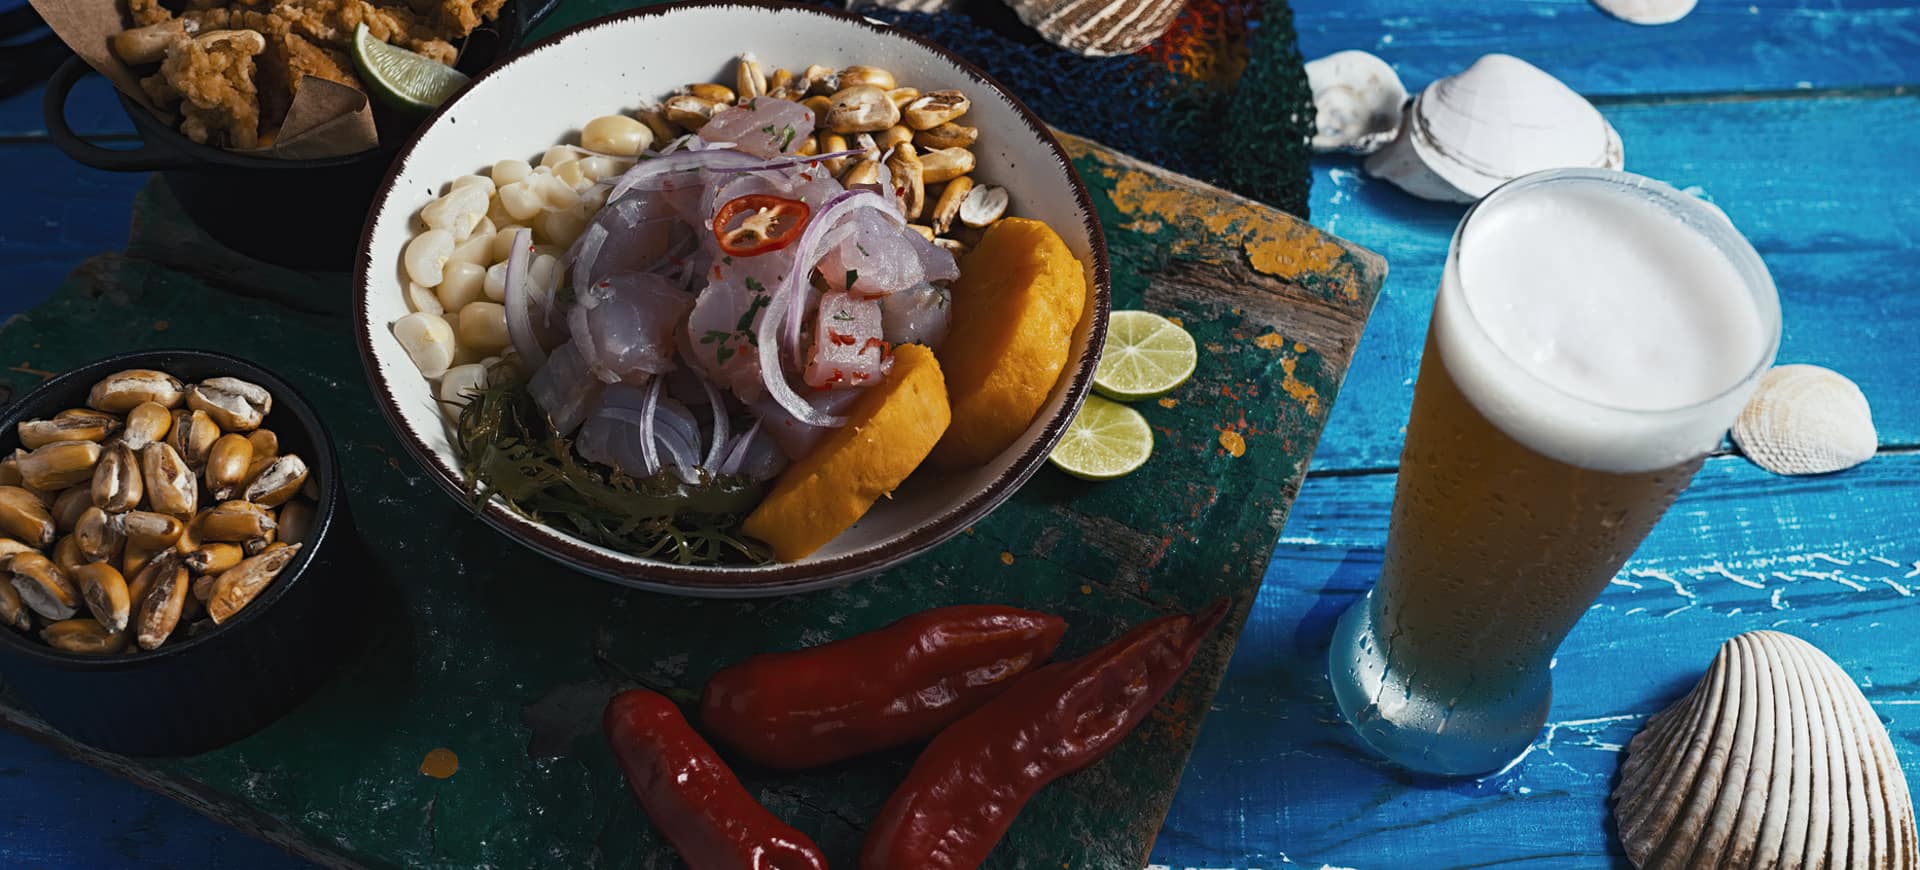 Why Peruvian Food is the best - Ceviche